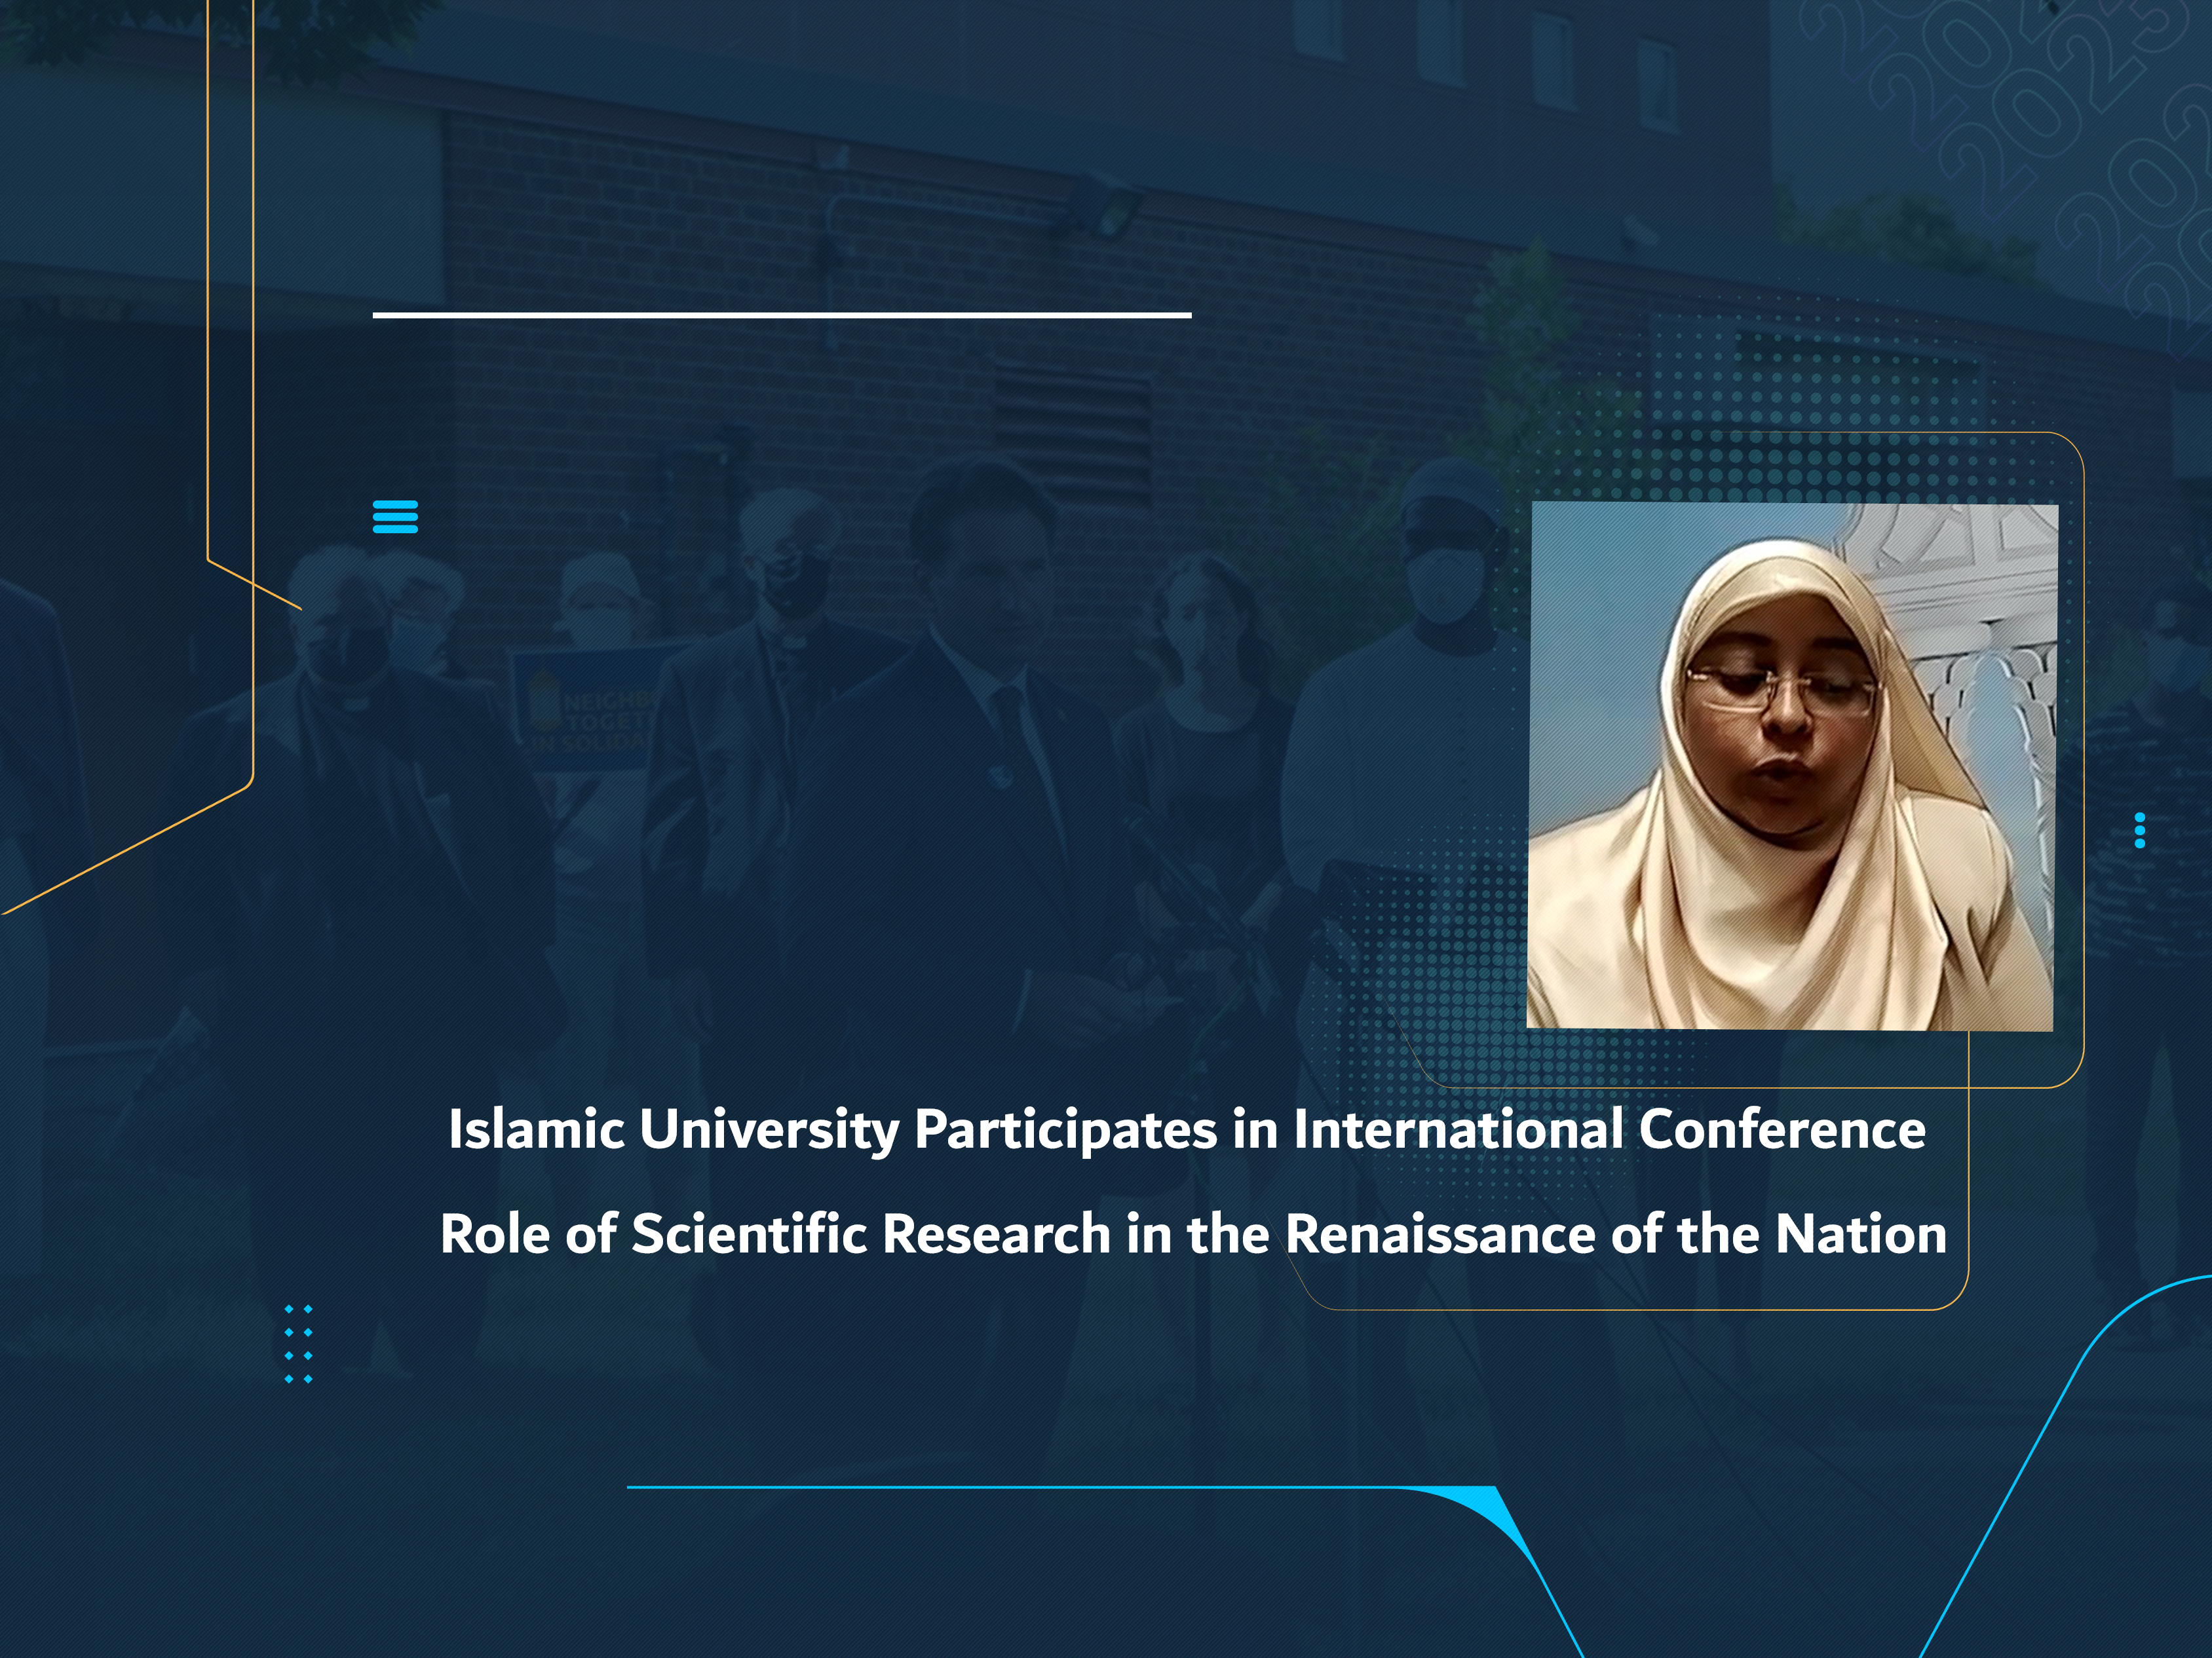 Islamic University Participates in International Conference "Role of Scientific Research in the Renaissance of the Nation"